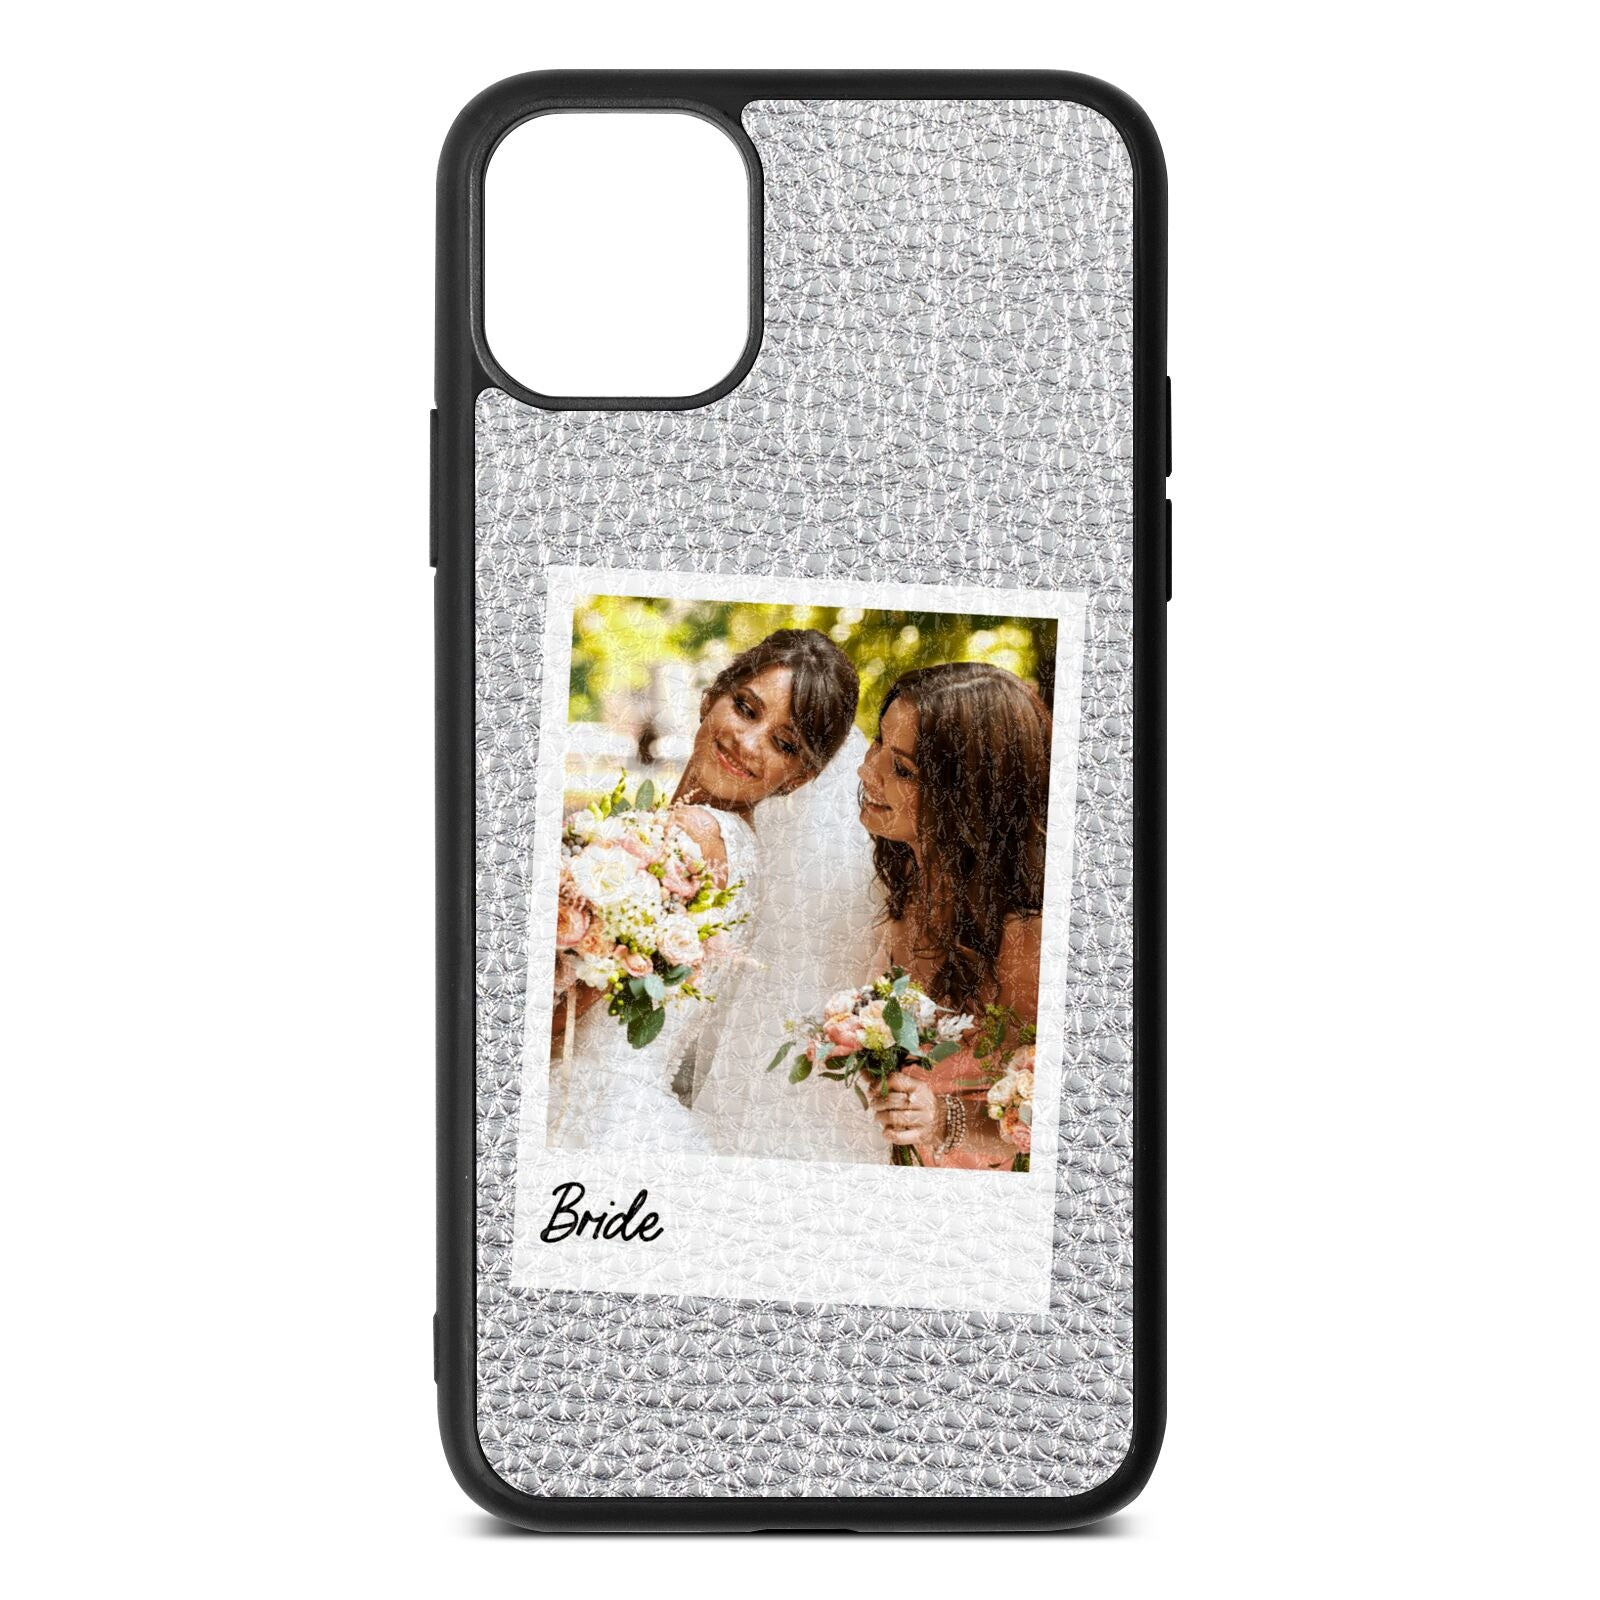 Bridal Photo Silver Pebble Leather iPhone 11 Pro Max Case